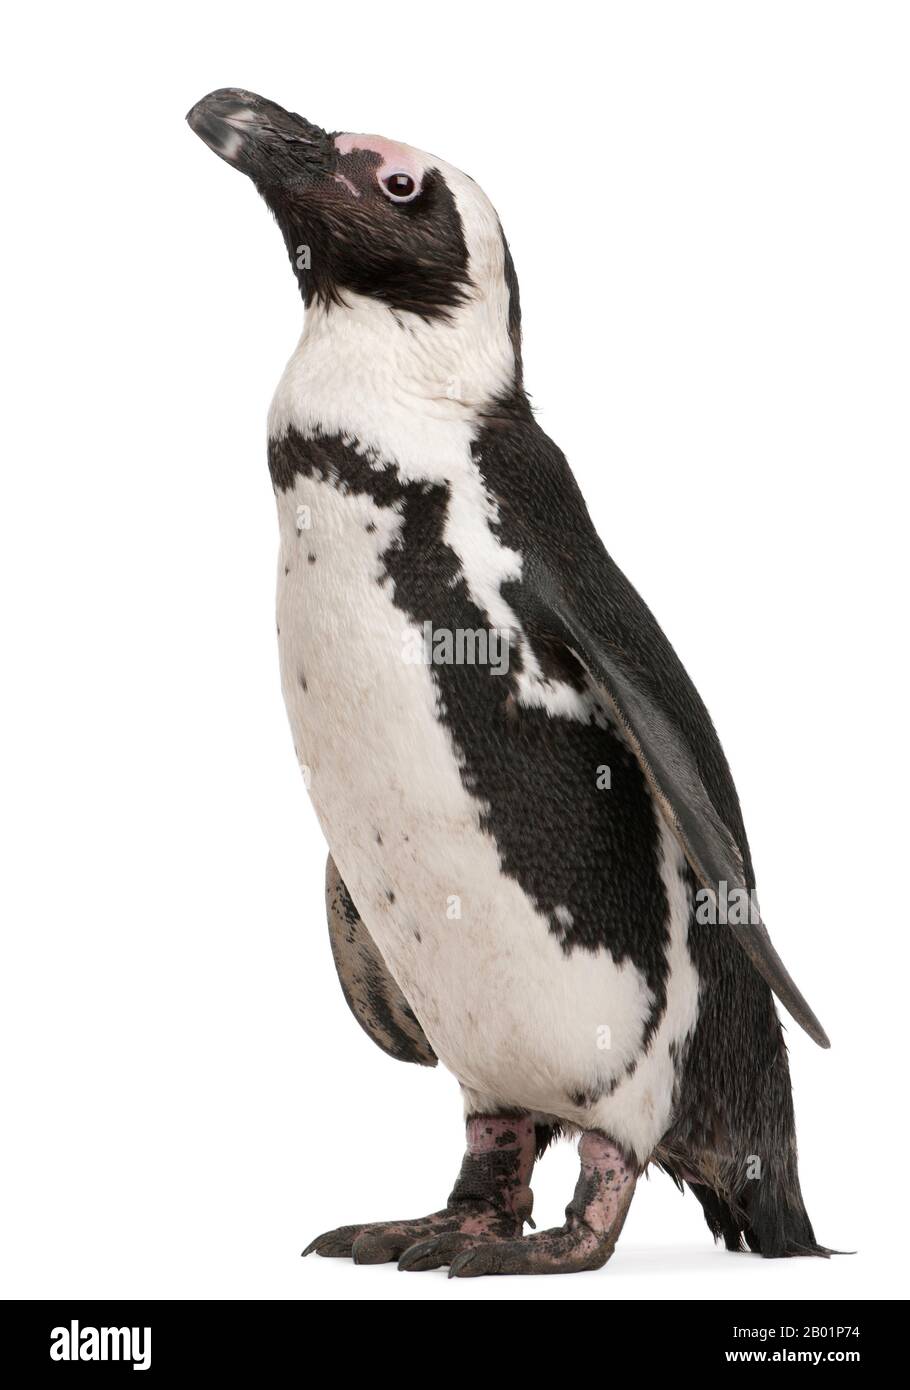 African Penguin, Spheniscus demersus, 10 years old, in front of white background Stock Photo